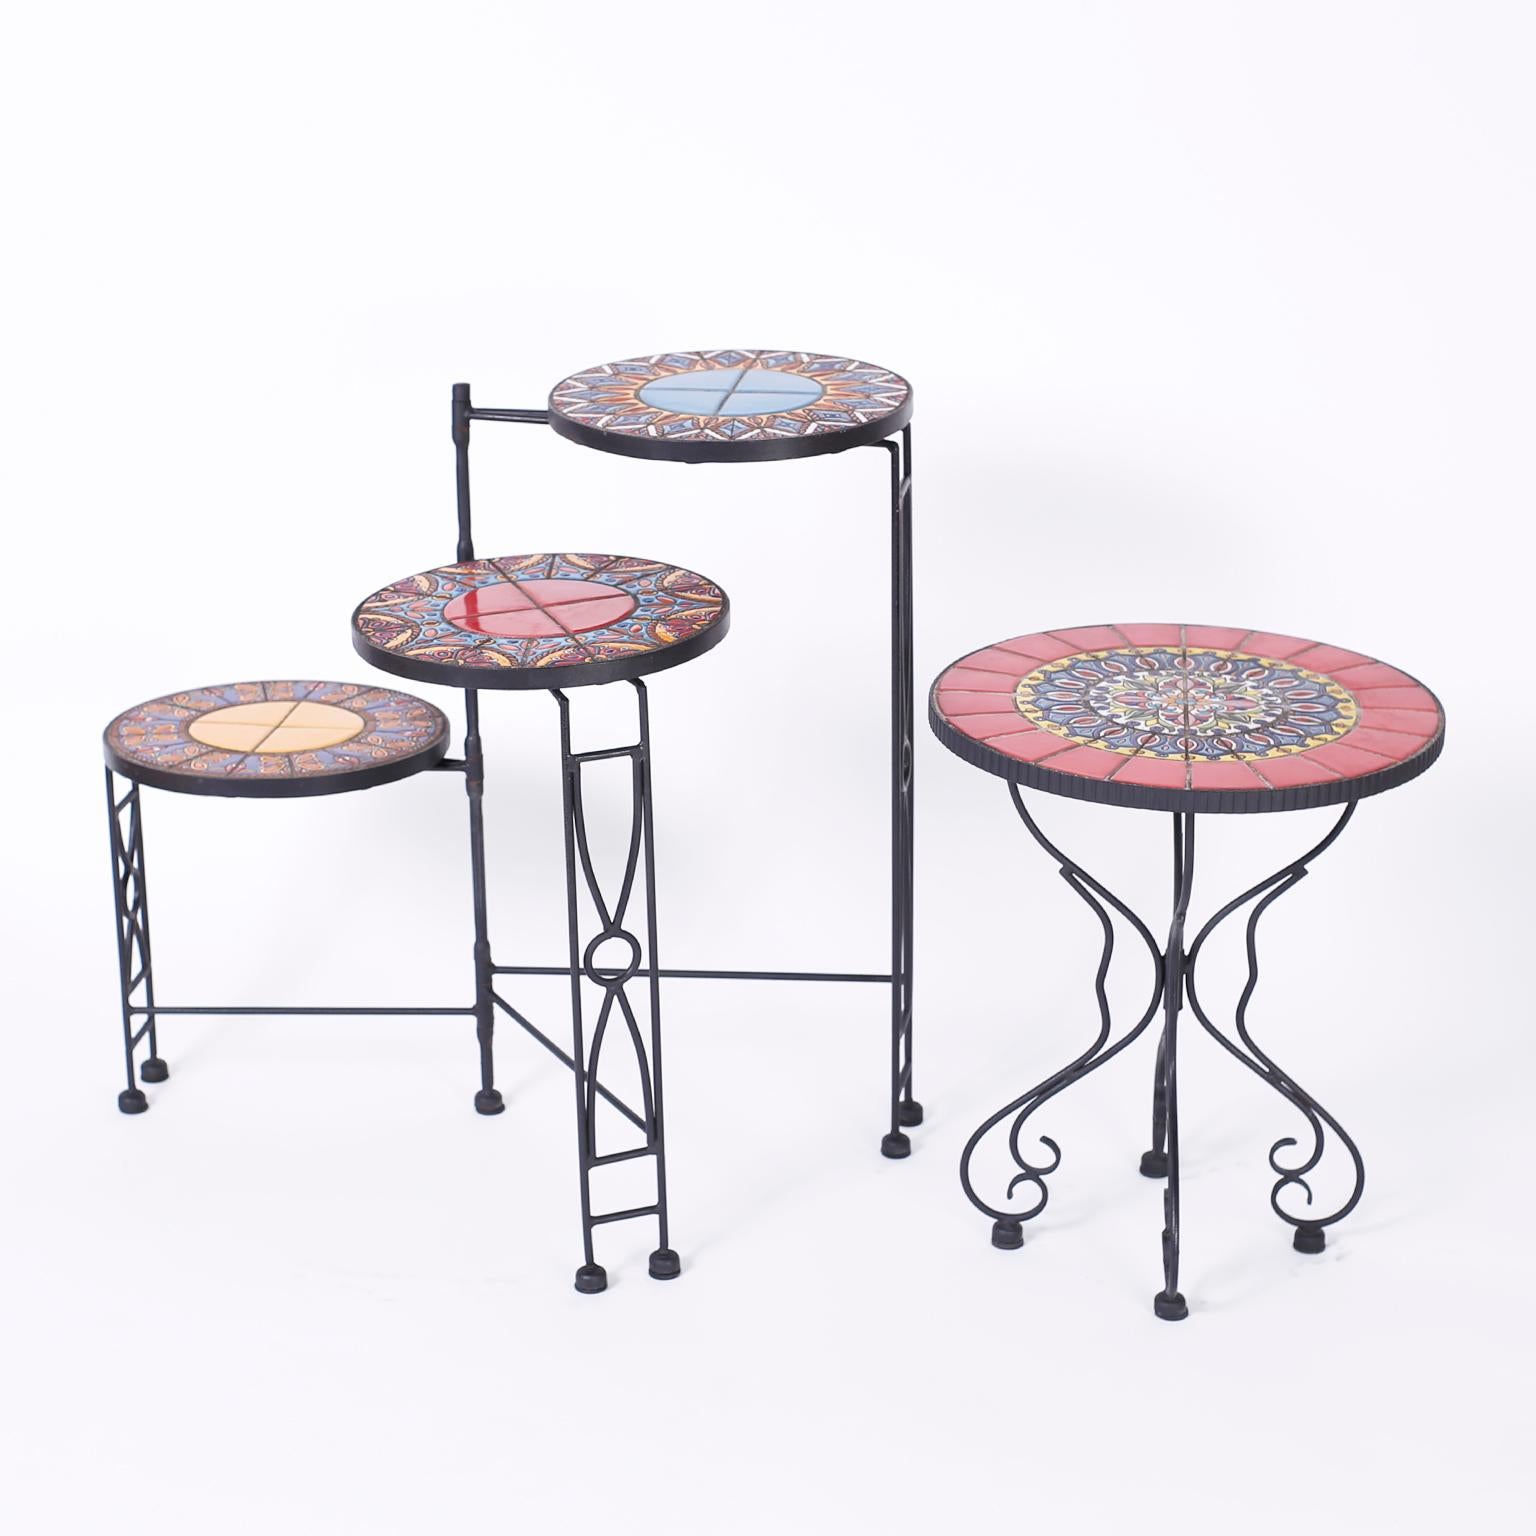 pier one mosaic table